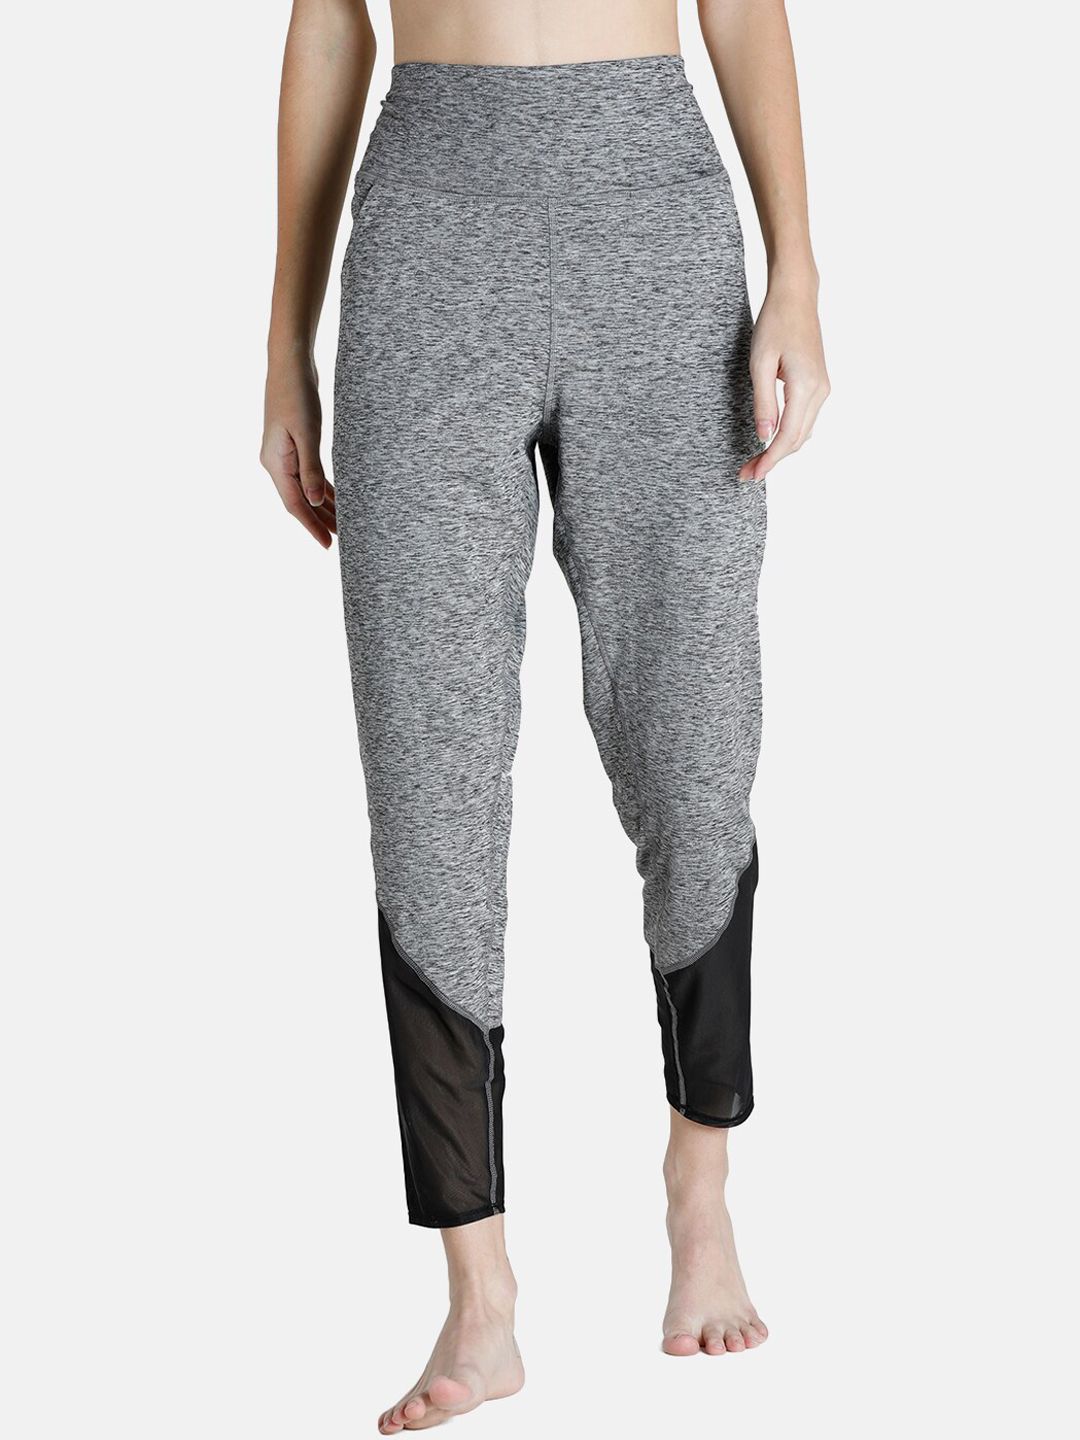 Puma Grey Slim Fit Yoga Track Pants with dryCELL Technology Price in India